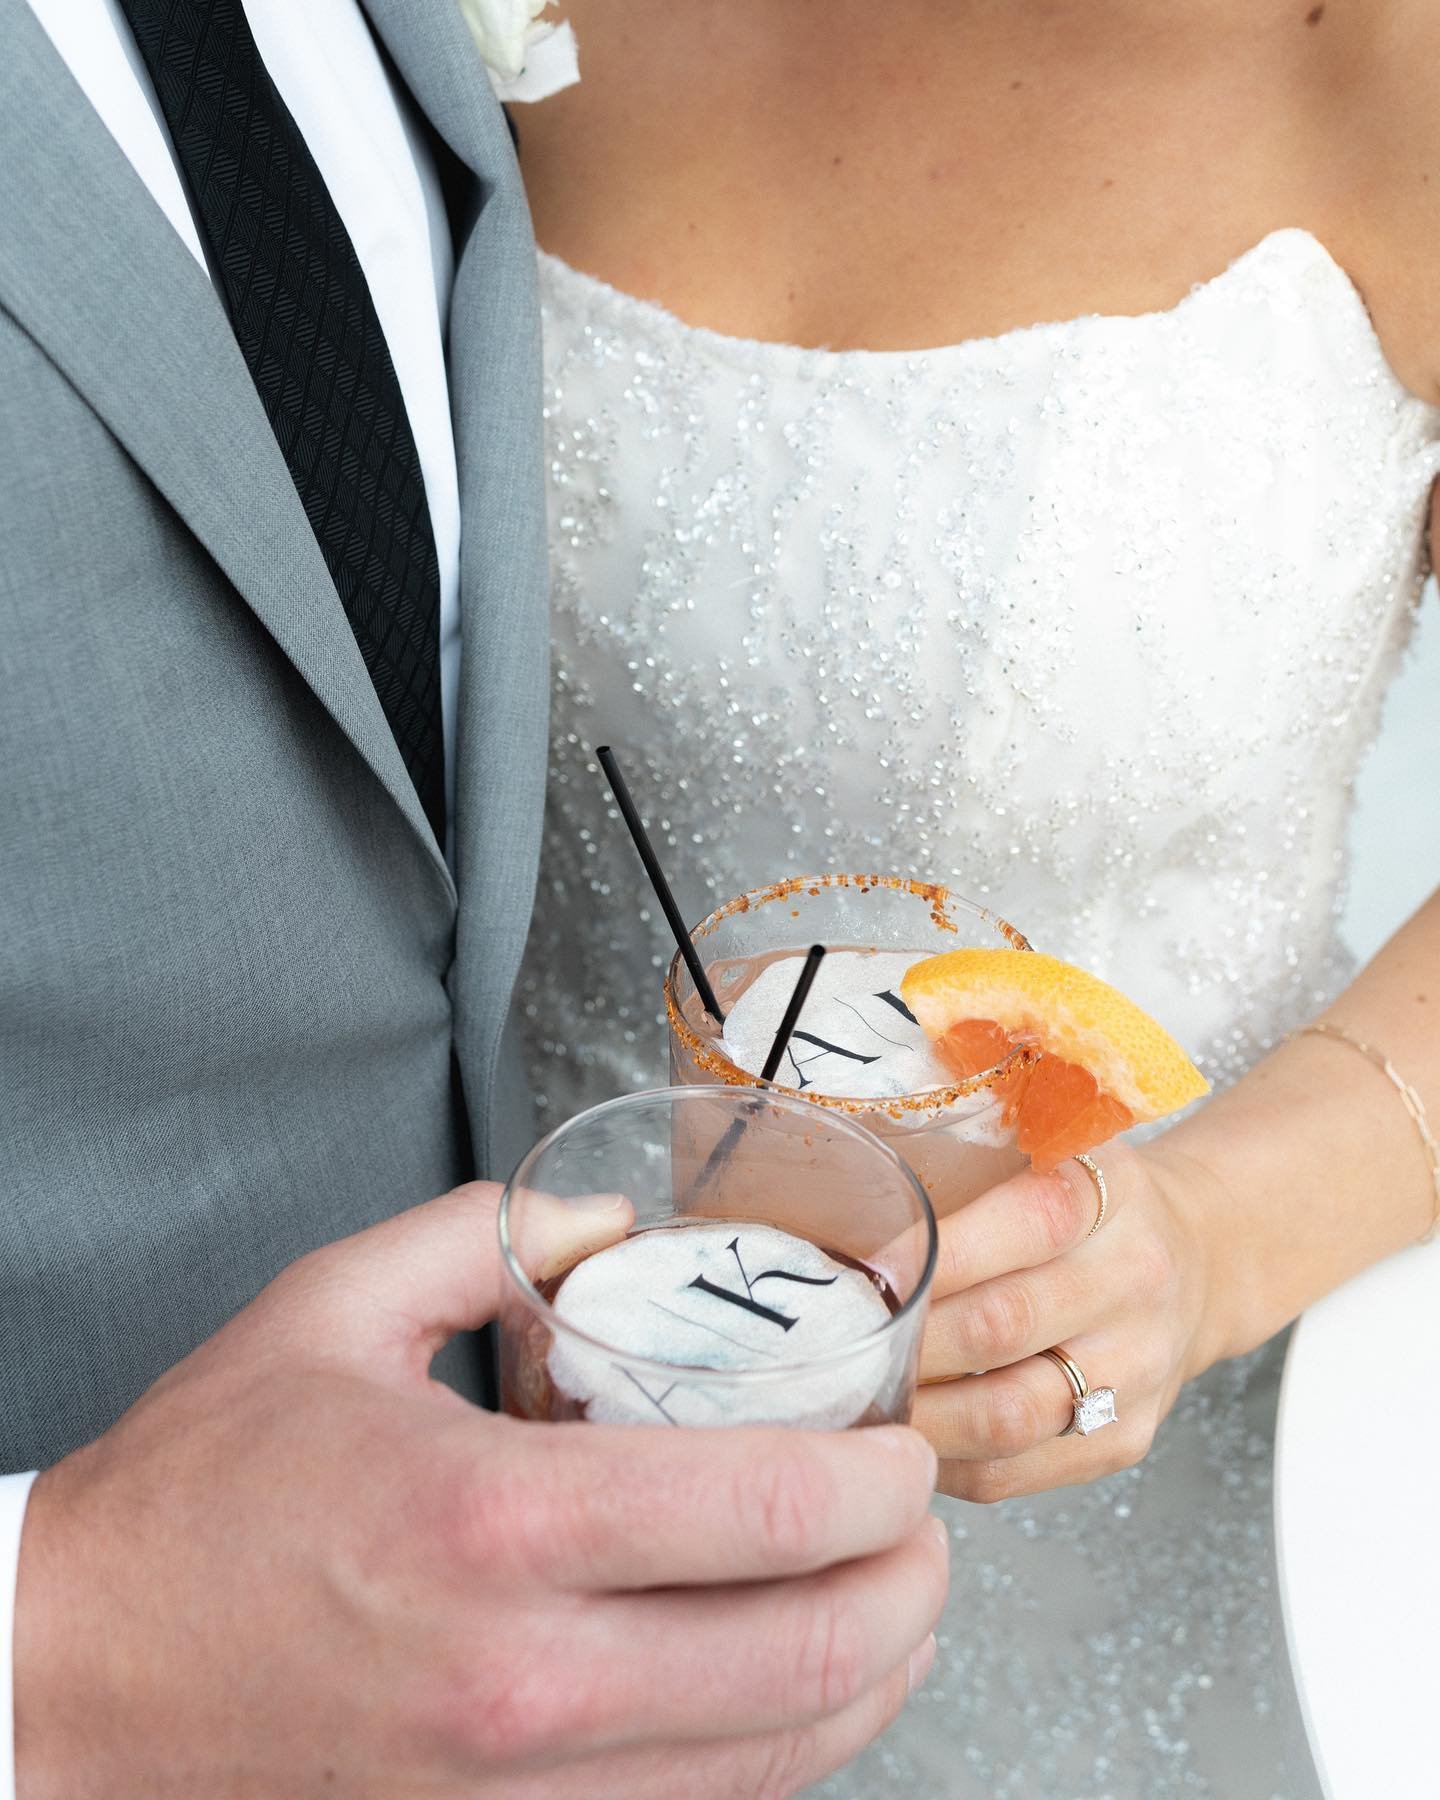 We loved that Andrew and Kiera had cocktail toppers featuring their initials- a tasteful touch that made each sip a little more special for them and their guests. ✨

Venue: @copperroseranch 
Dress: @gl__gala 
Hair &amp; Makeup: @studio117_ 
Florals: 